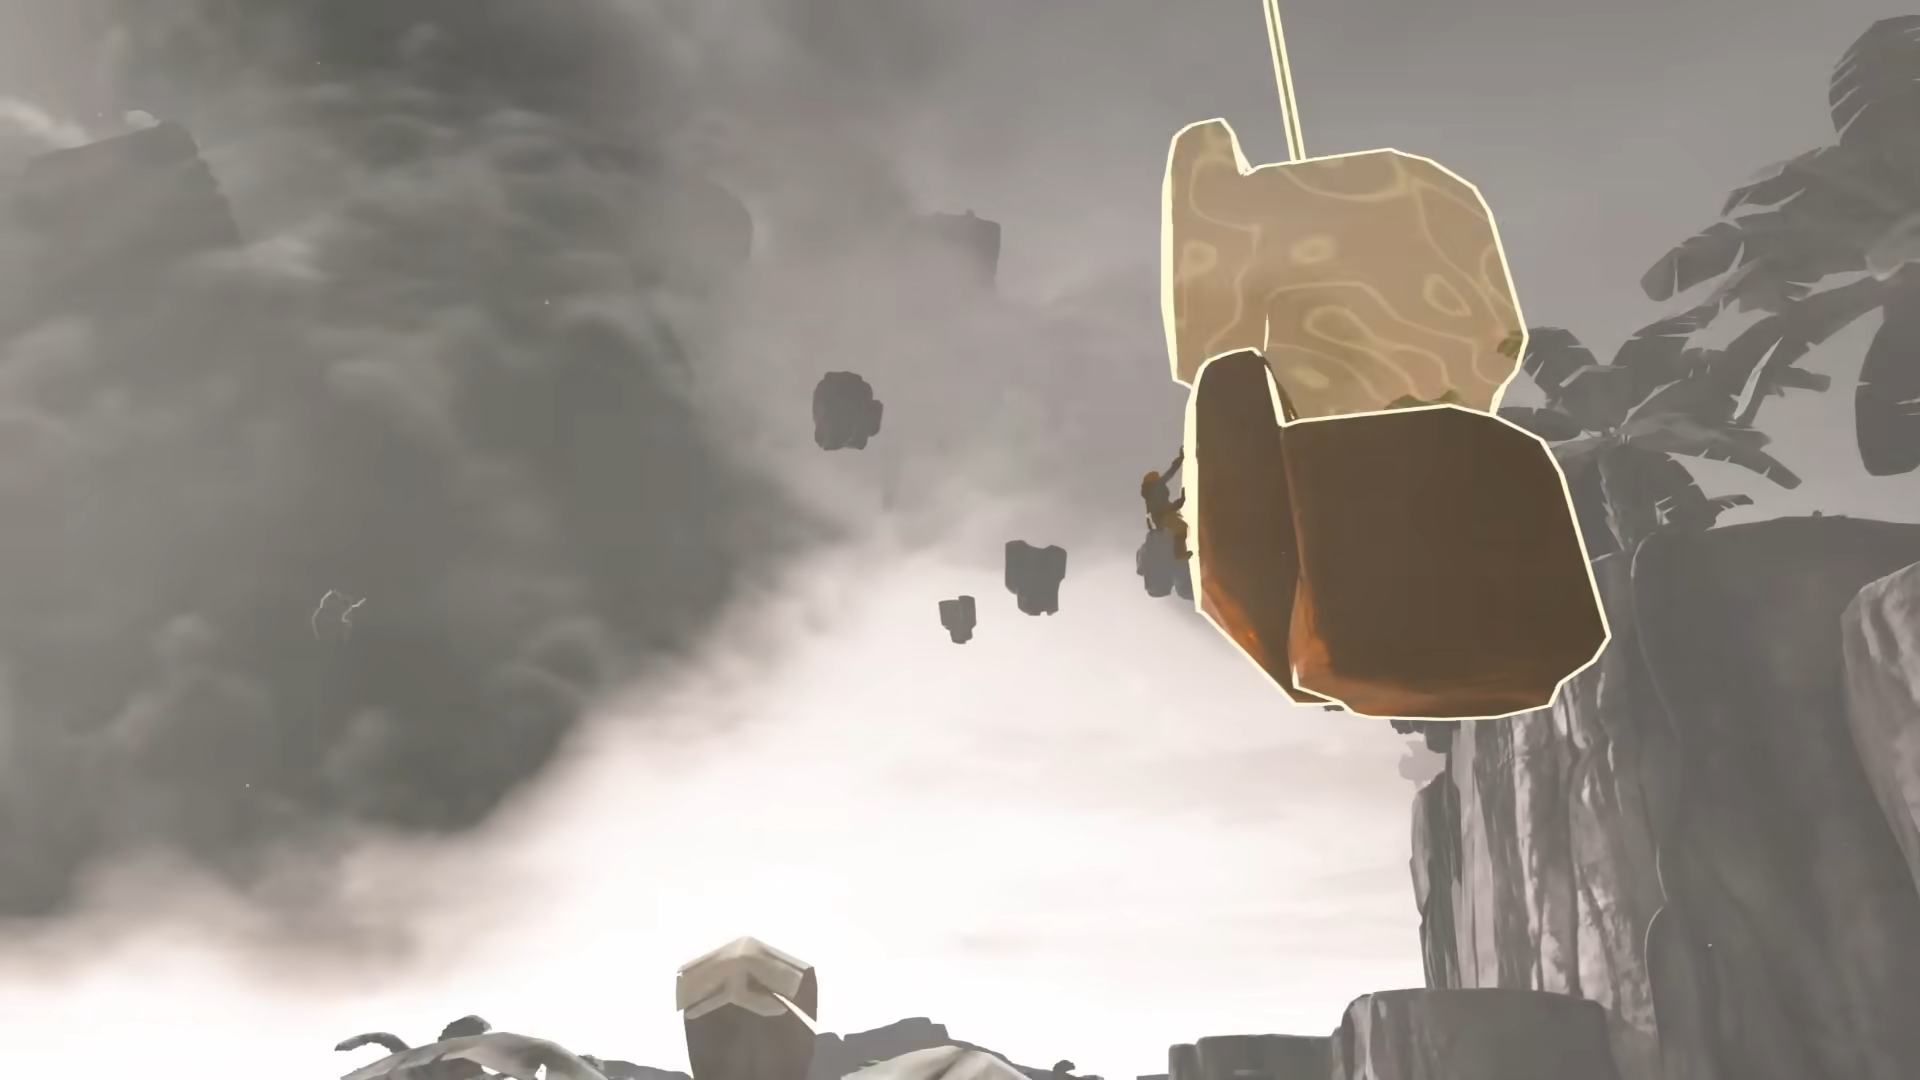 Link (right) riding a stone ascending to the clouds. Image source: Nintendo